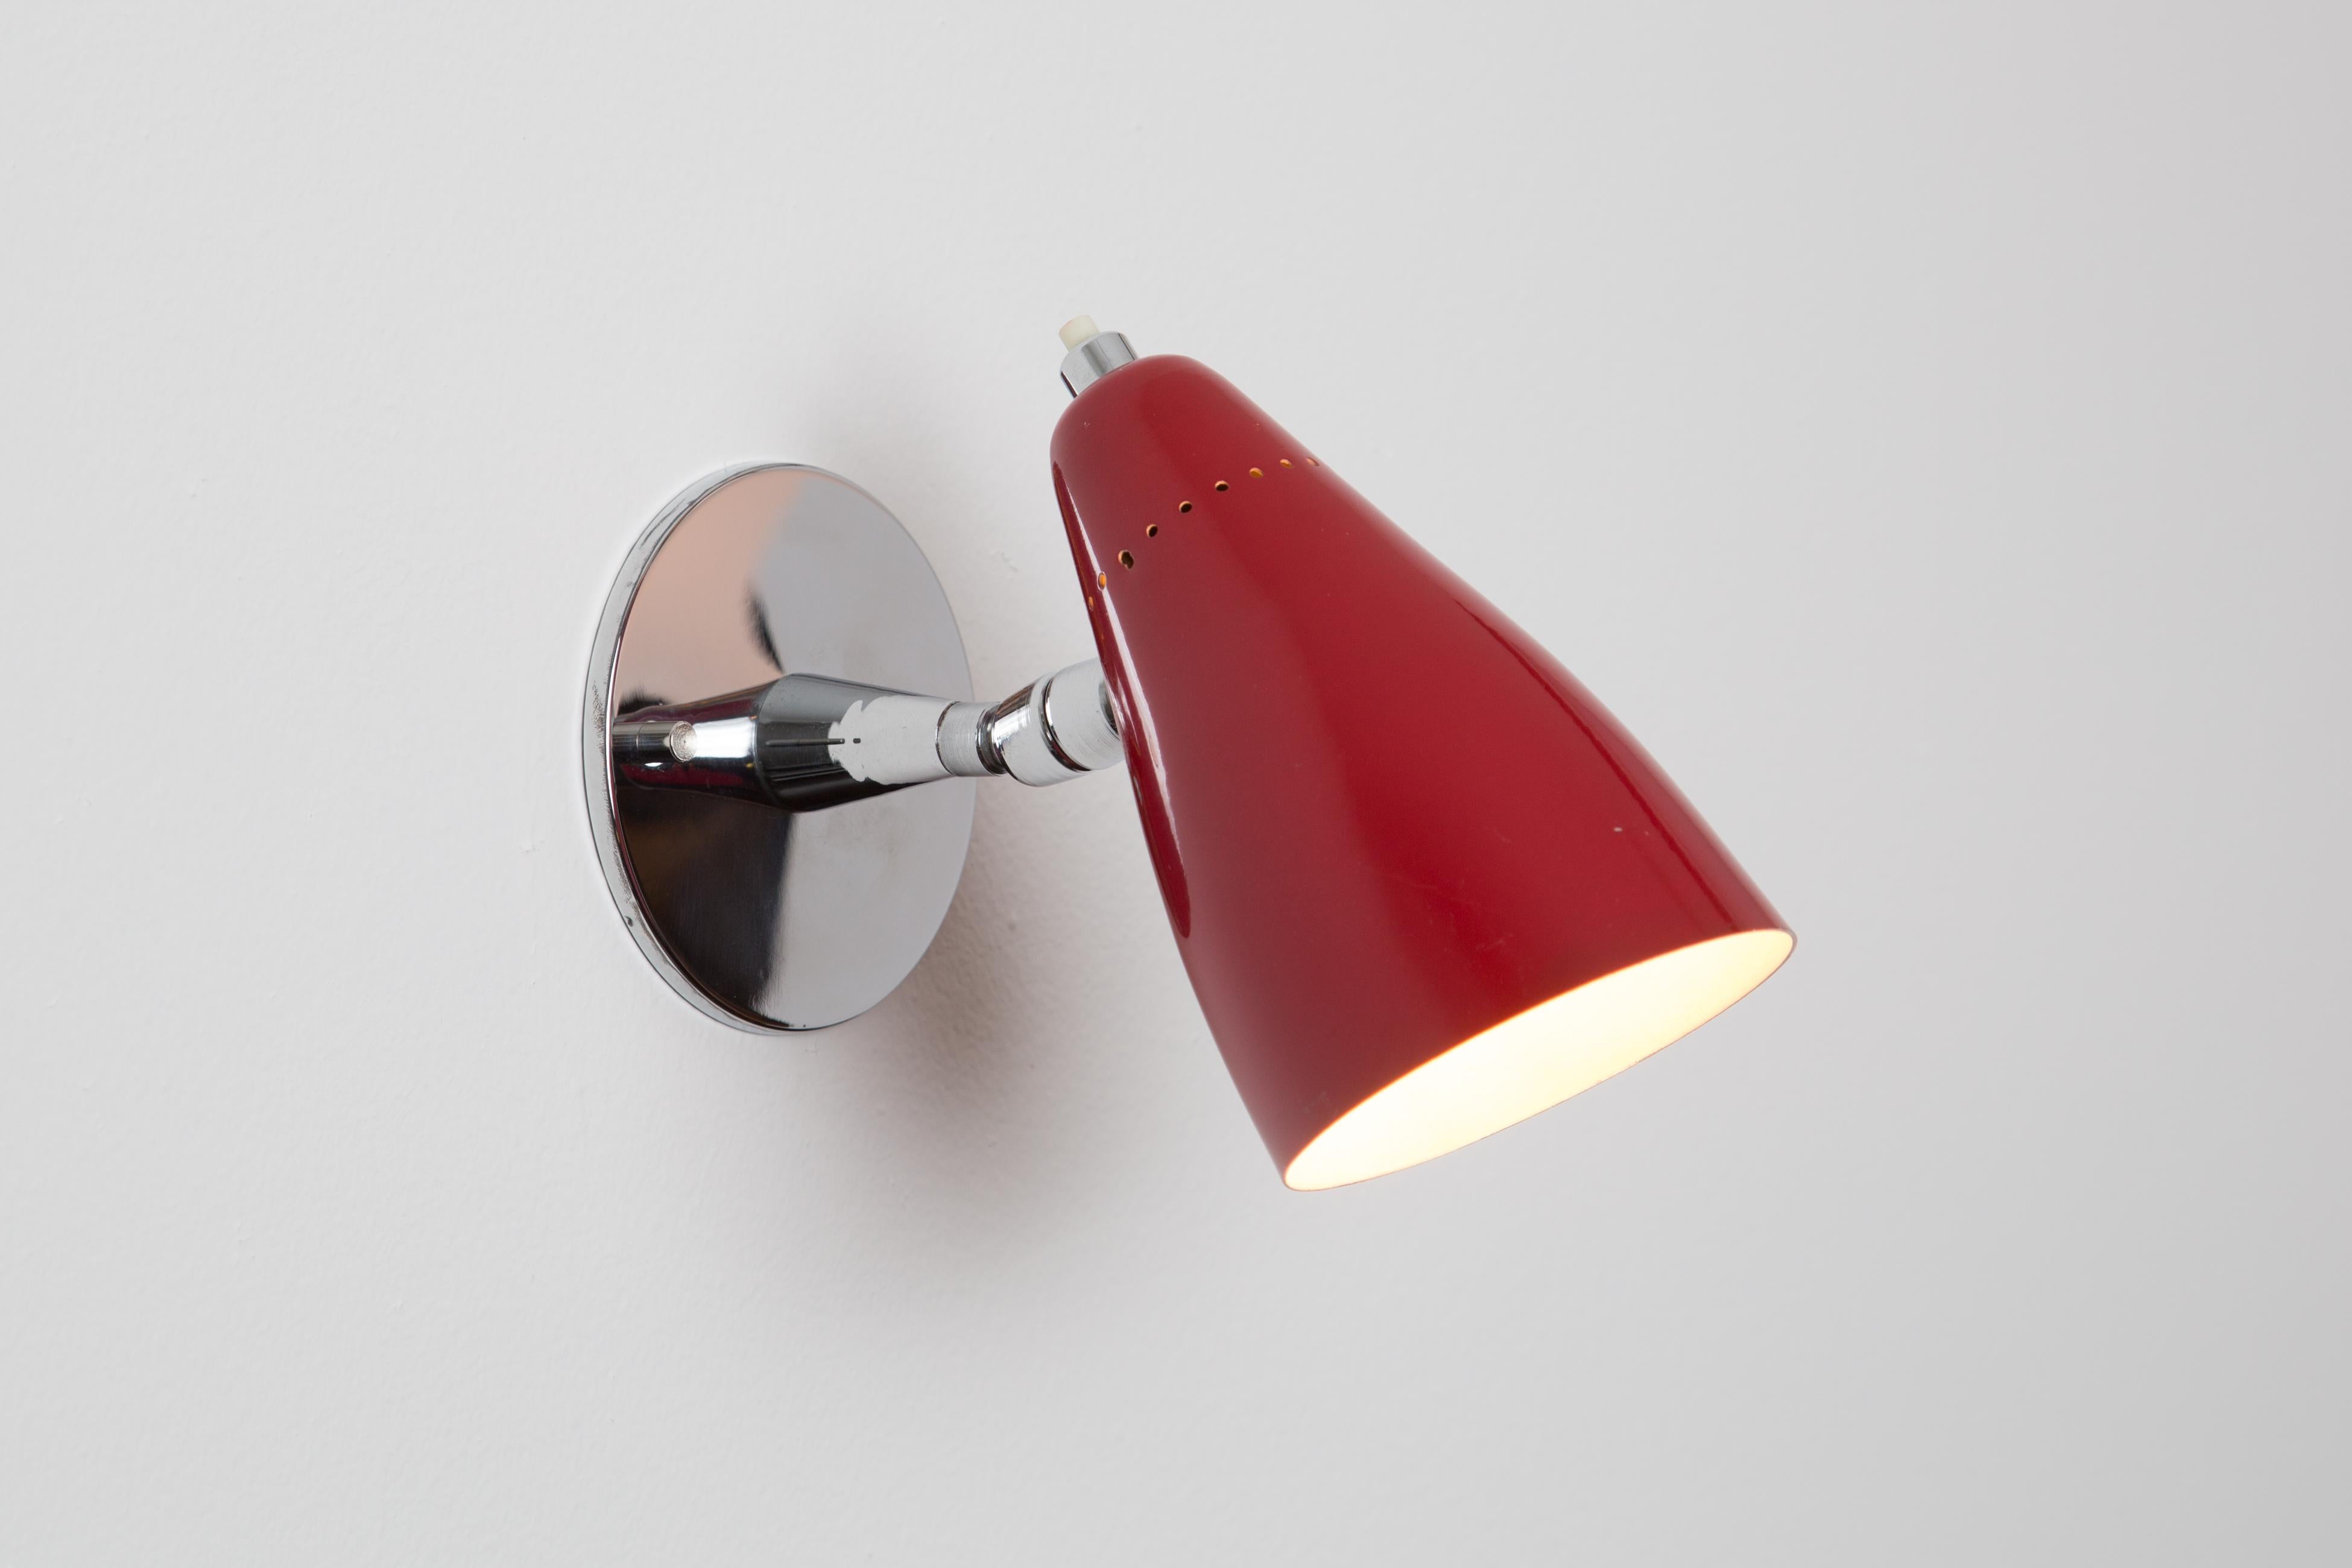 Pair of 1960s Giuseppe Ostuni Model #101 Red Articulating Sconces for O-Luce. Executed in polished chrome and red painted perforated aluminum shade. Sconces pivot up/down and left/right. An incredibly clean and refined design by one of the Italian